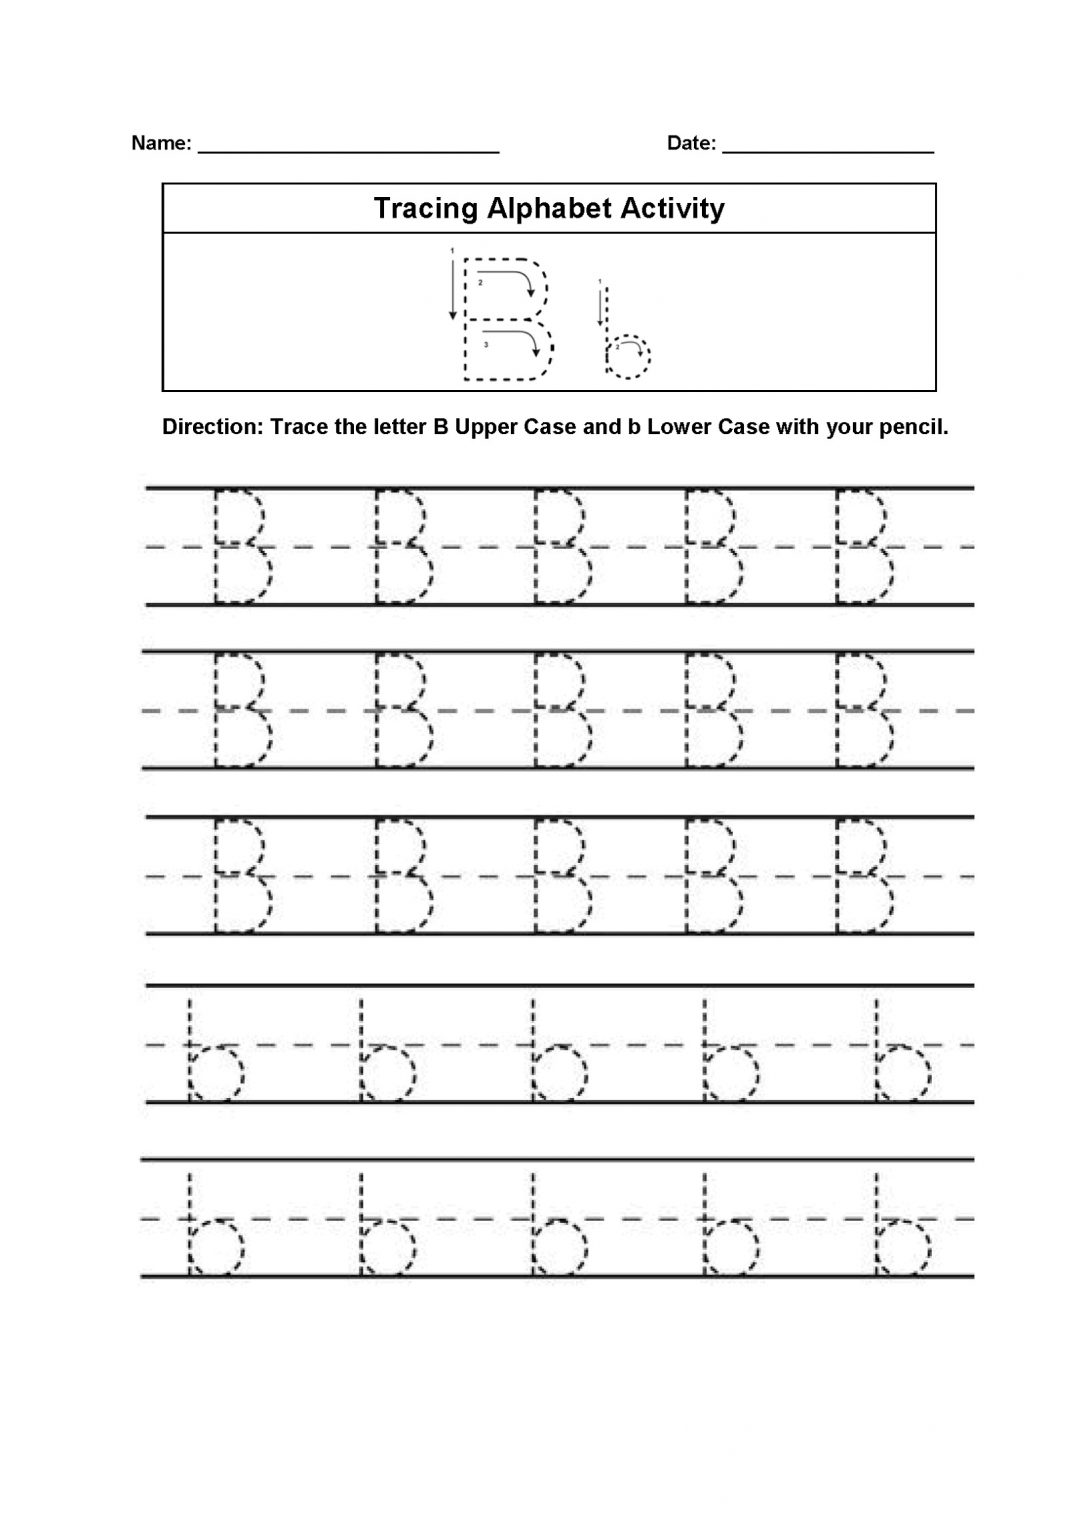 trace-letter-b-activity-sheets-for-preschool-101-activity